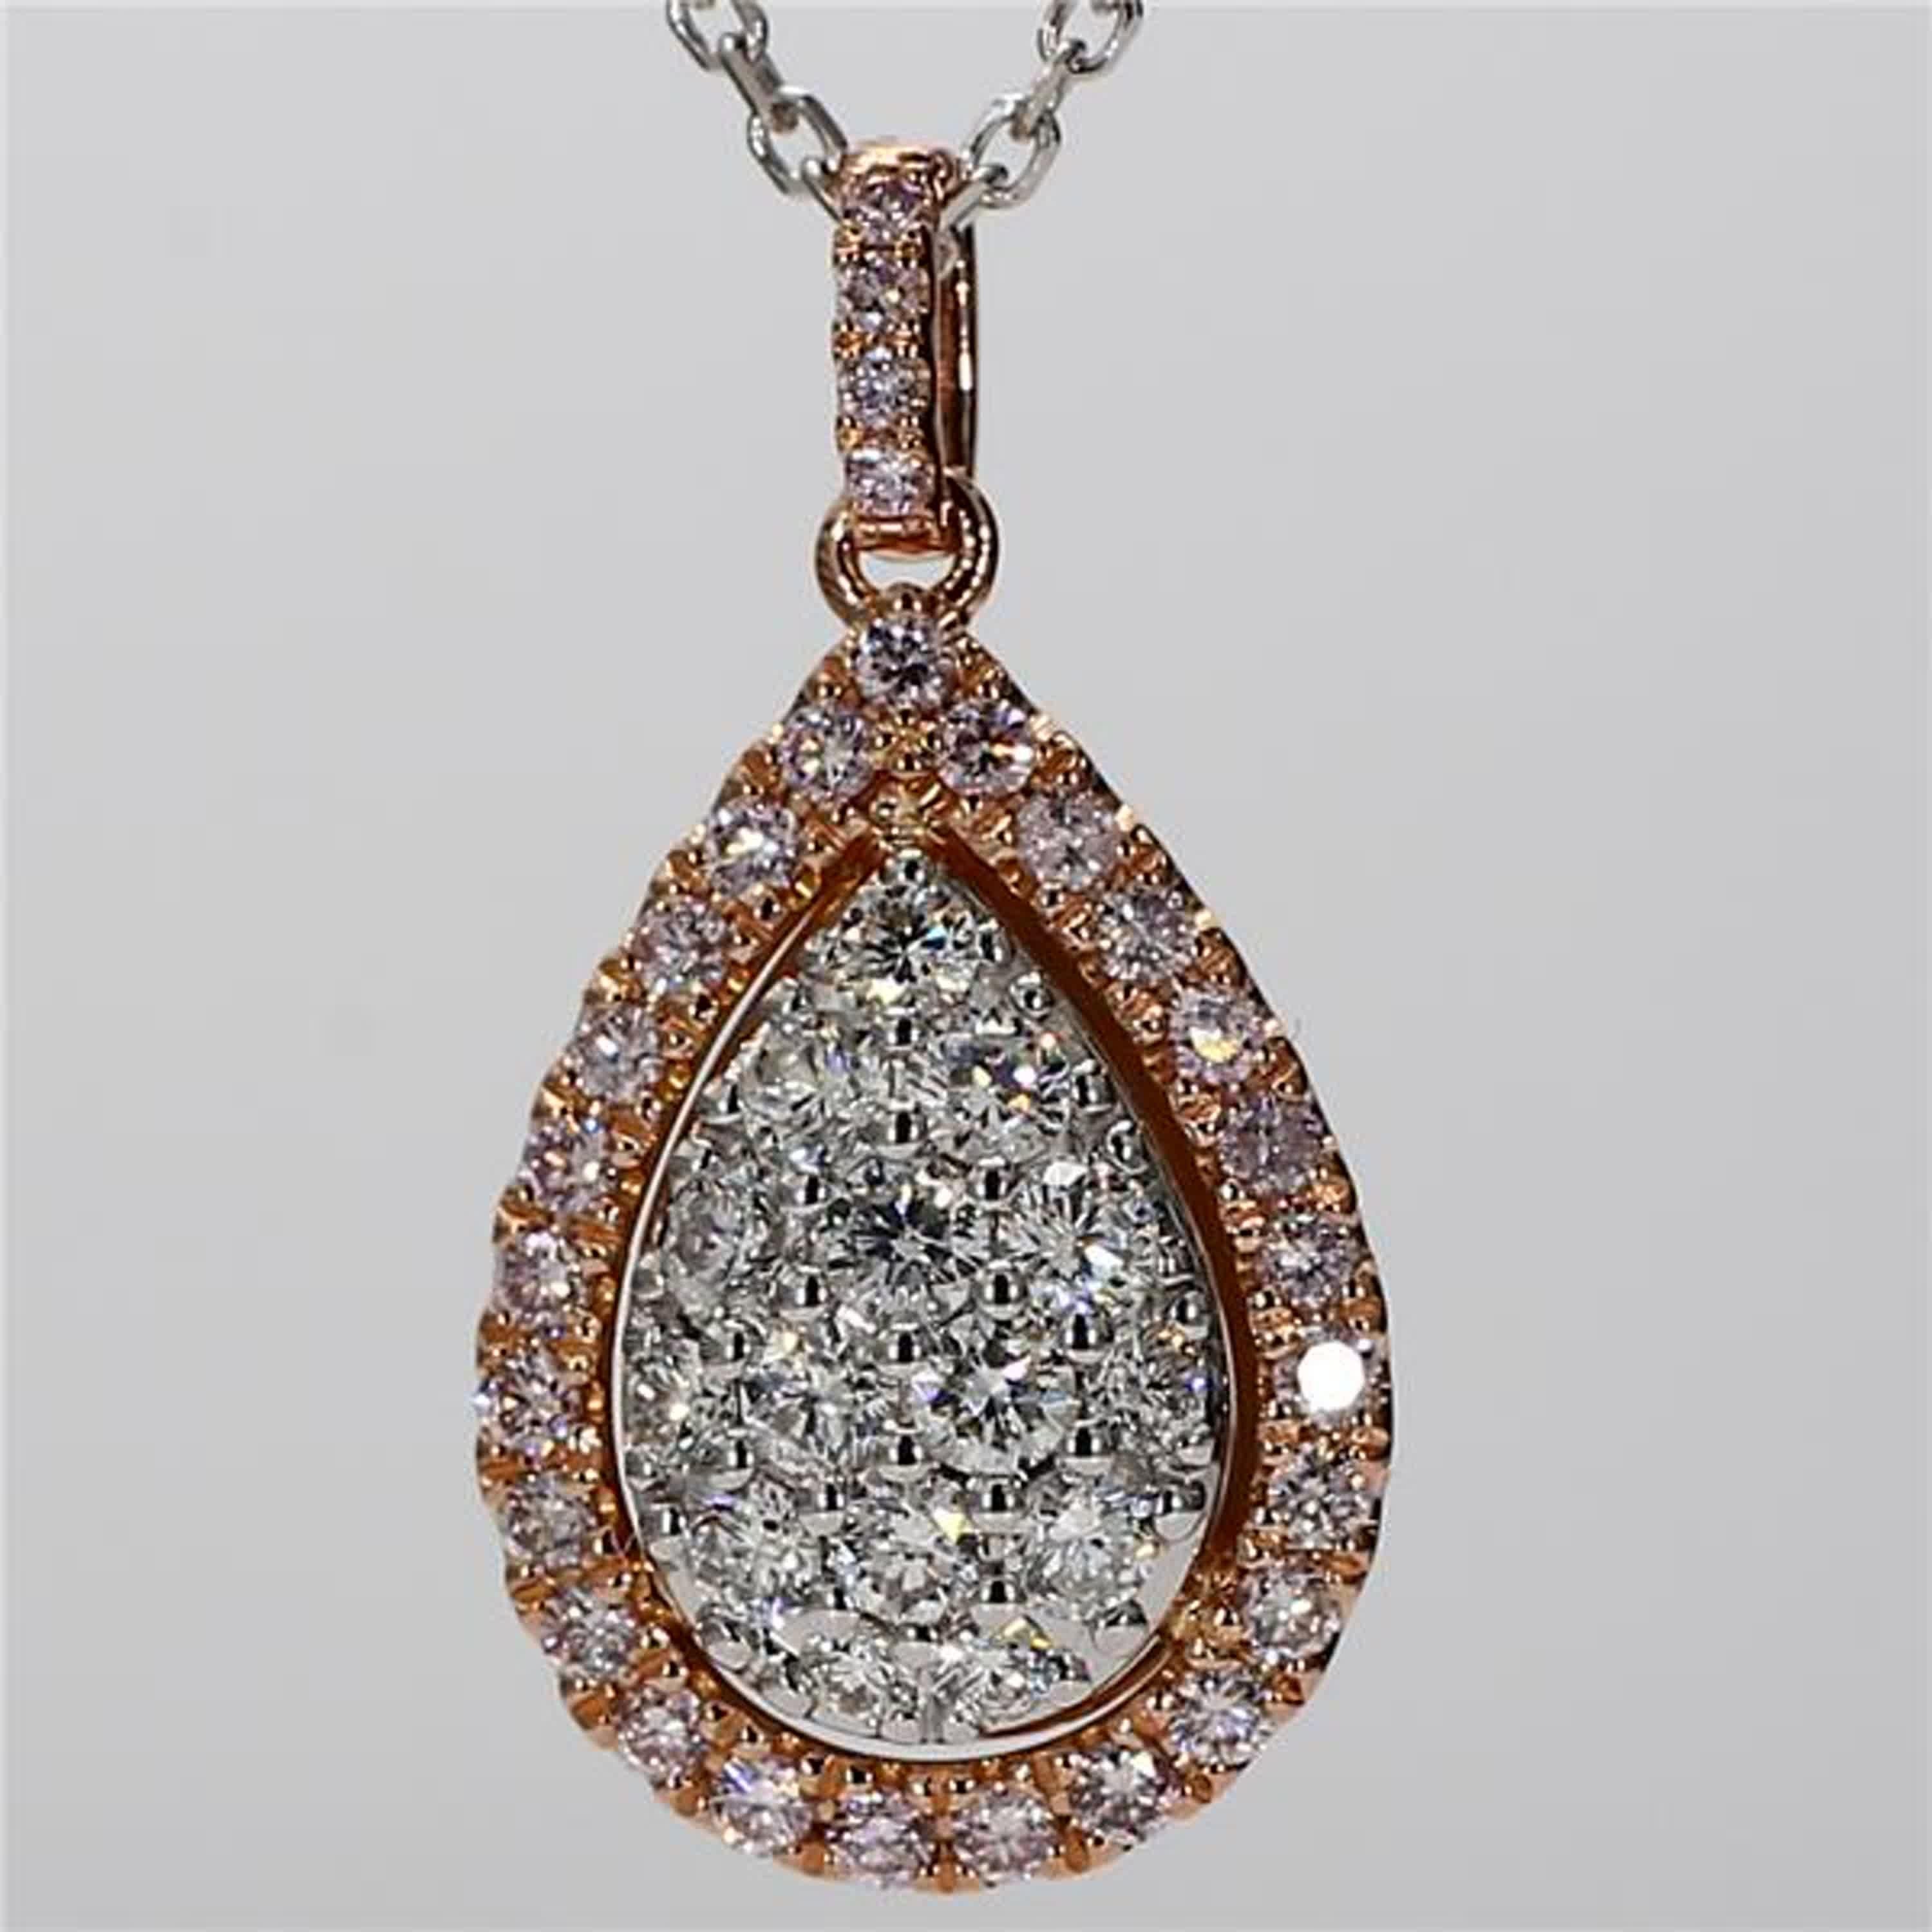 RareGemWorld's classic diamond pendant. Mounted in a beautiful 18K Rose and White Gold setting with natural round pink diamond melee complimented by natural round white diamond melee. This pendant is guaranteed to impress and enhance your personal